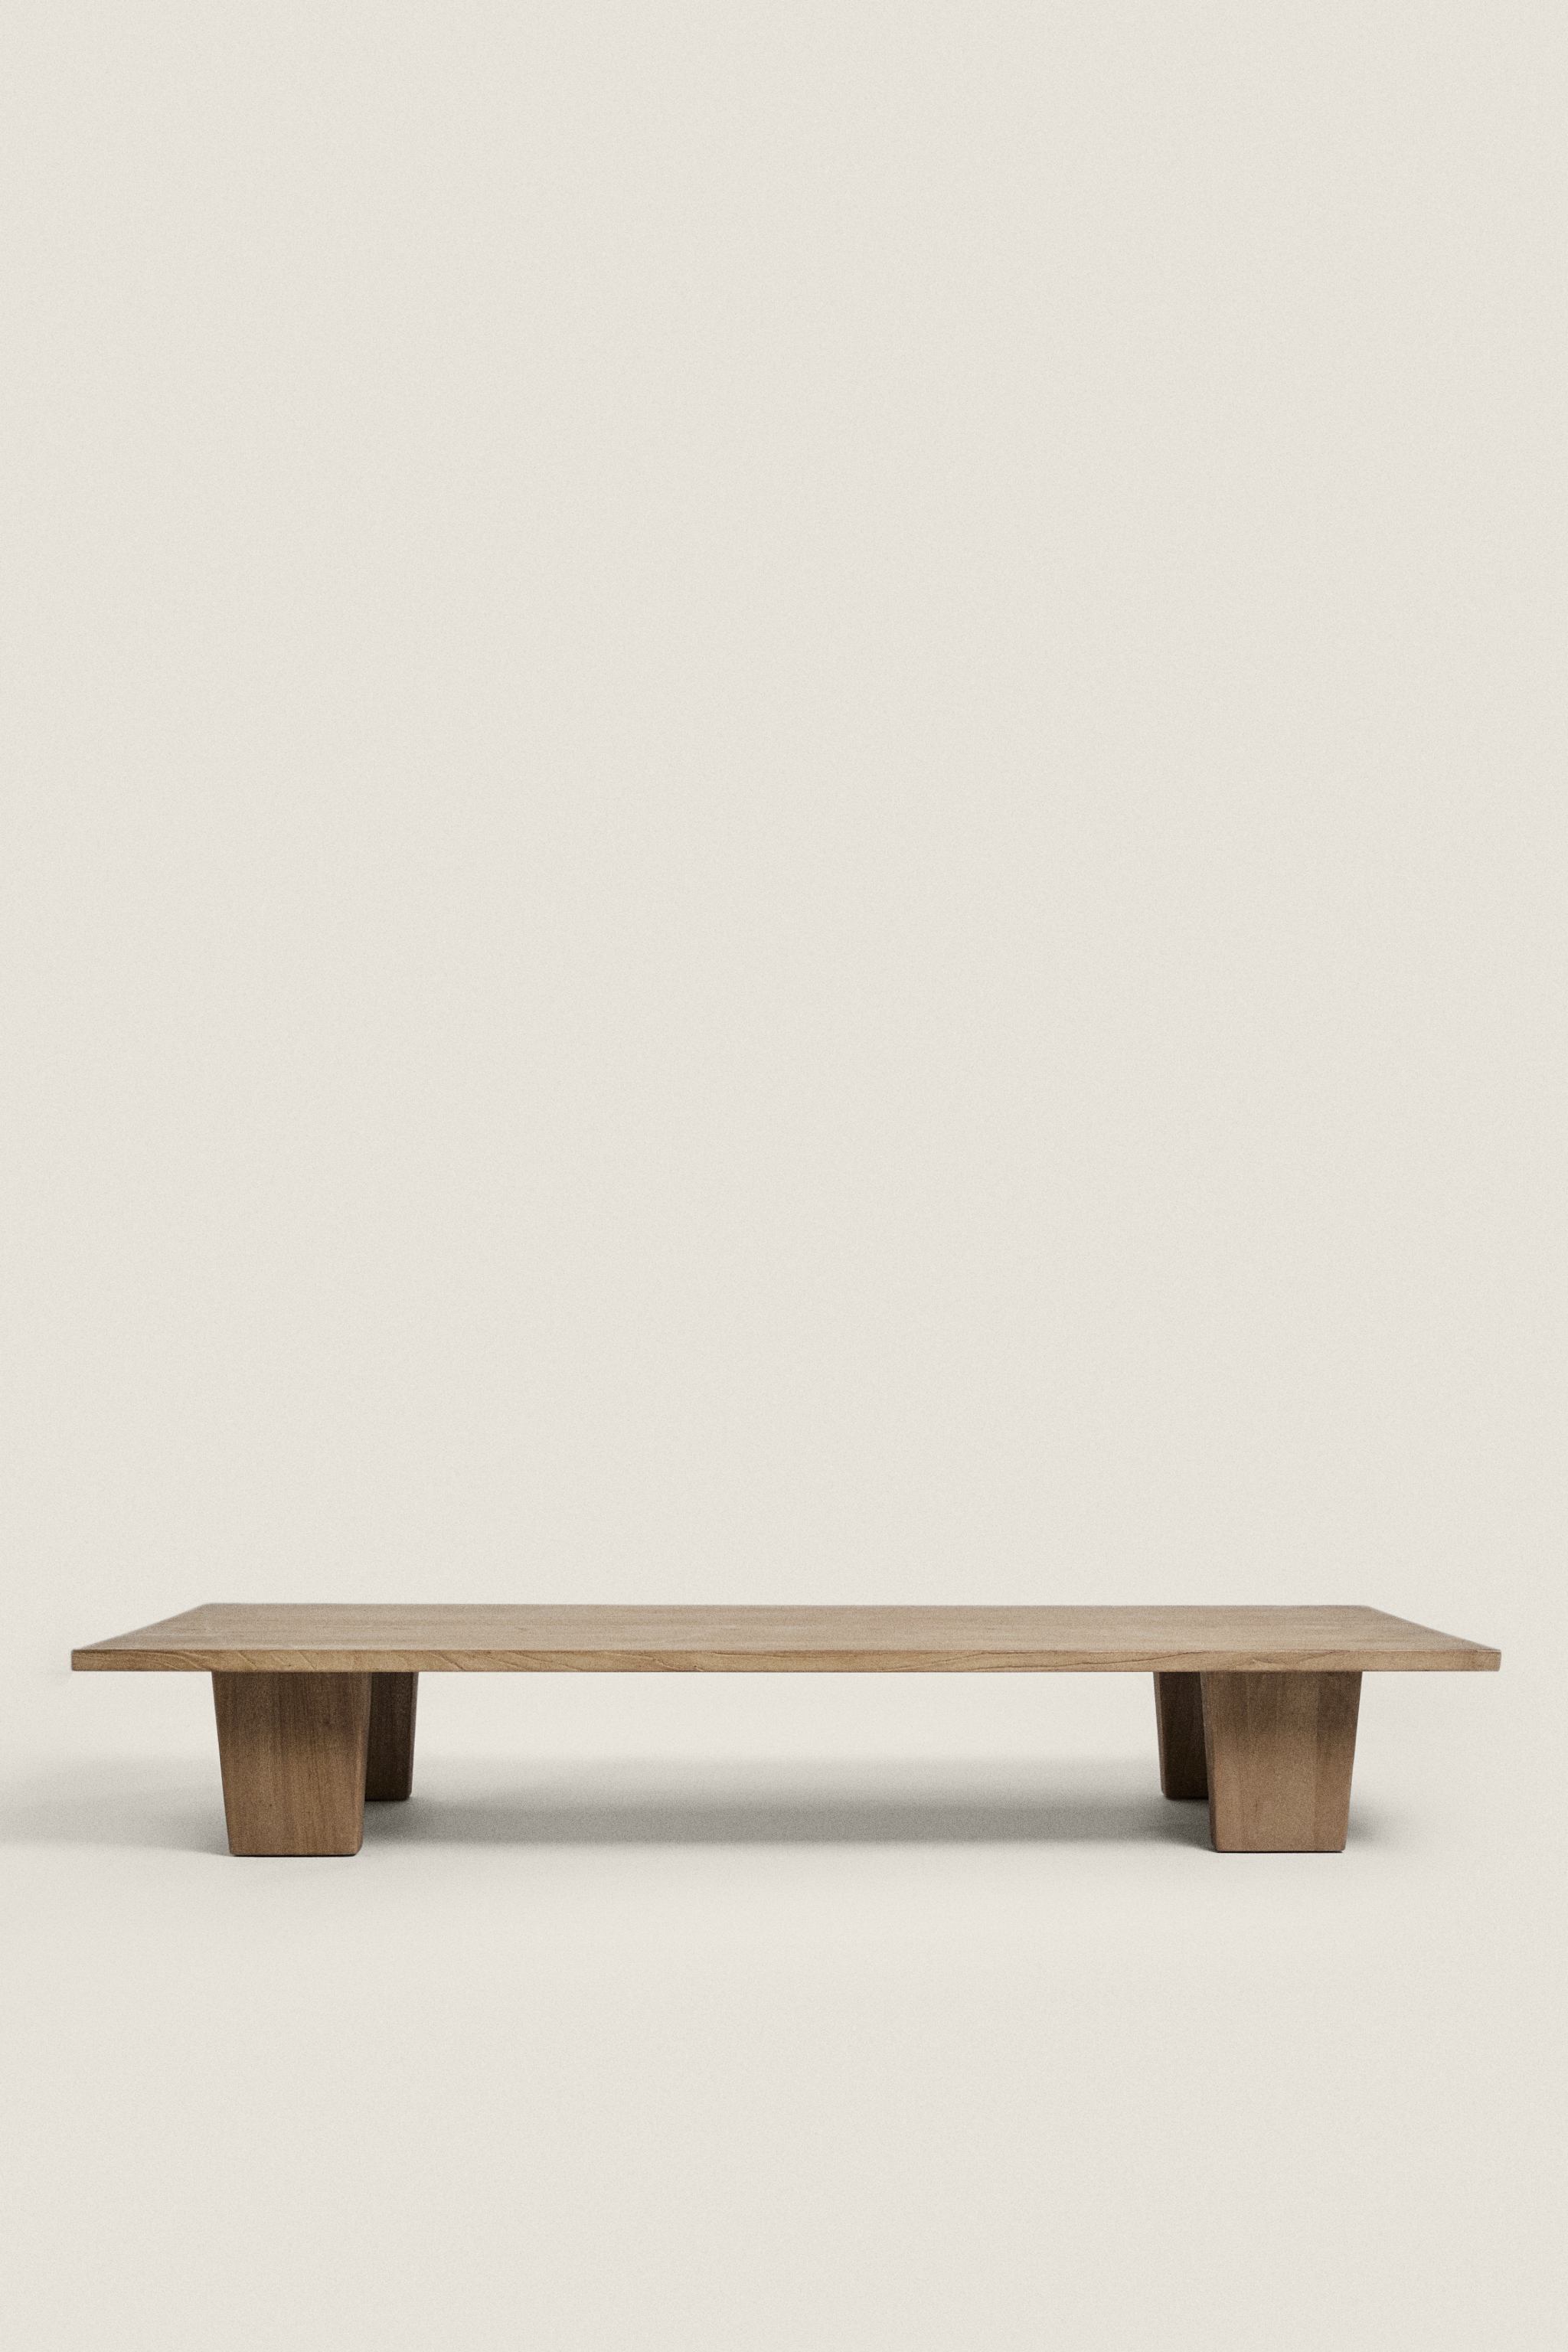 ELM WOOD CENTER TABLE/ COFFEE TABLE